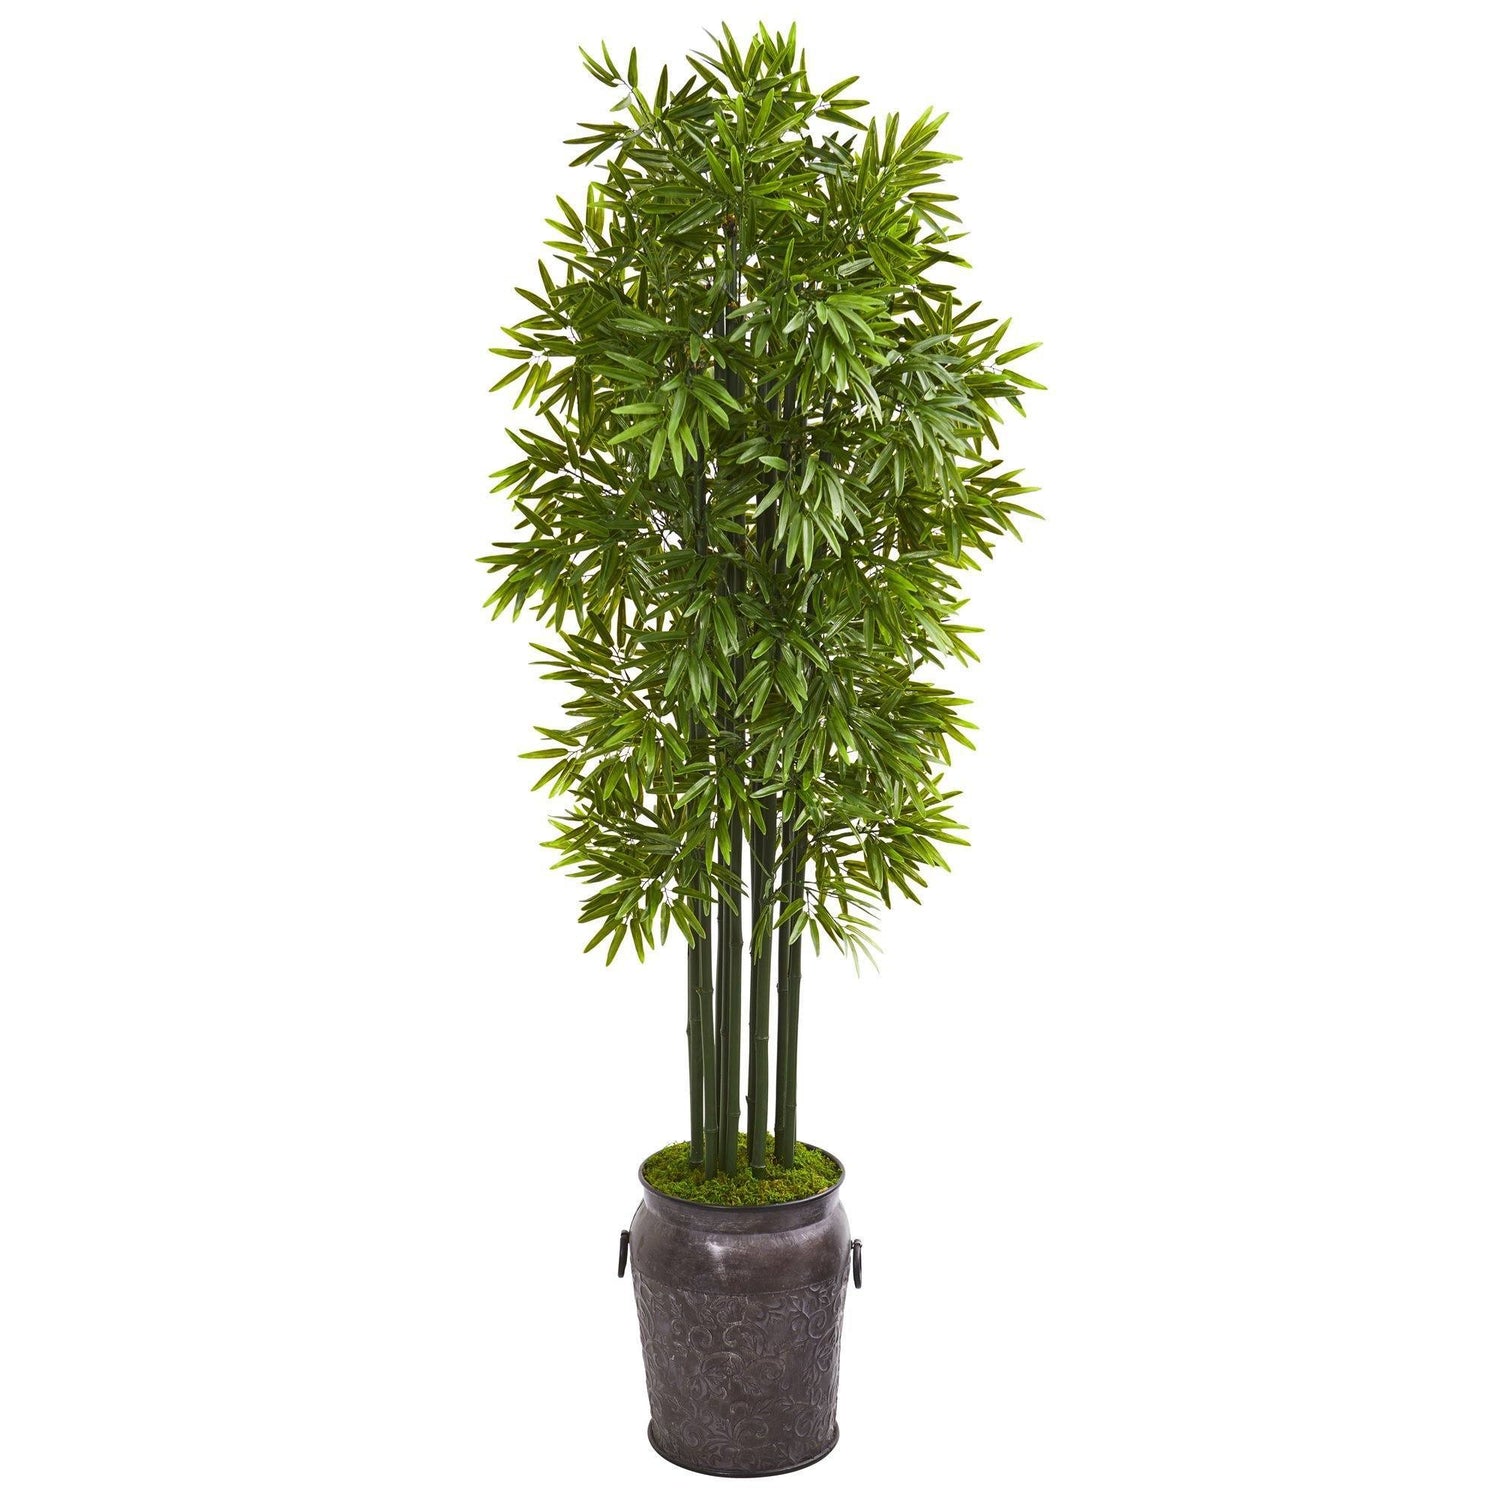 6’ Bamboo Artificial Tree with Black Trunks in Planter (Indoor/Outdoor)